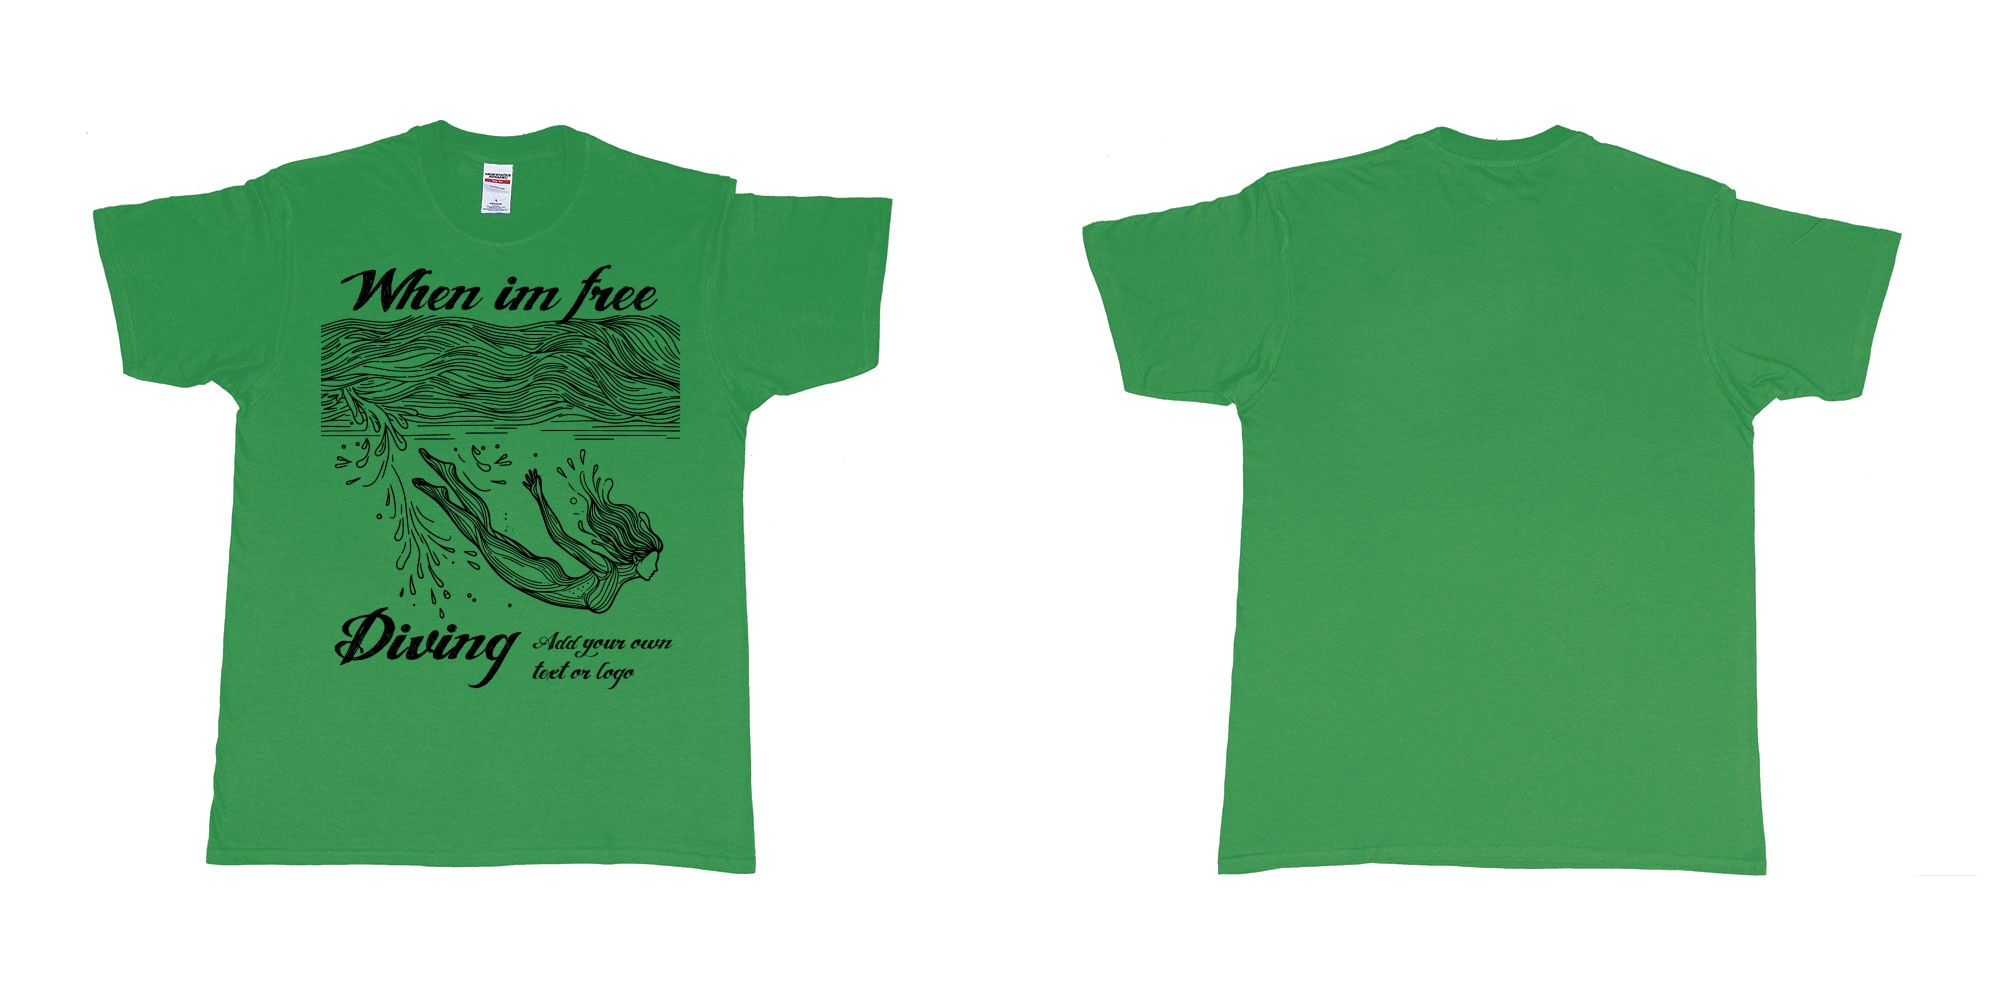 Custom tshirt design when im free diving add own text or logo in fabric color irish-green choice your own text made in Bali by The Pirate Way